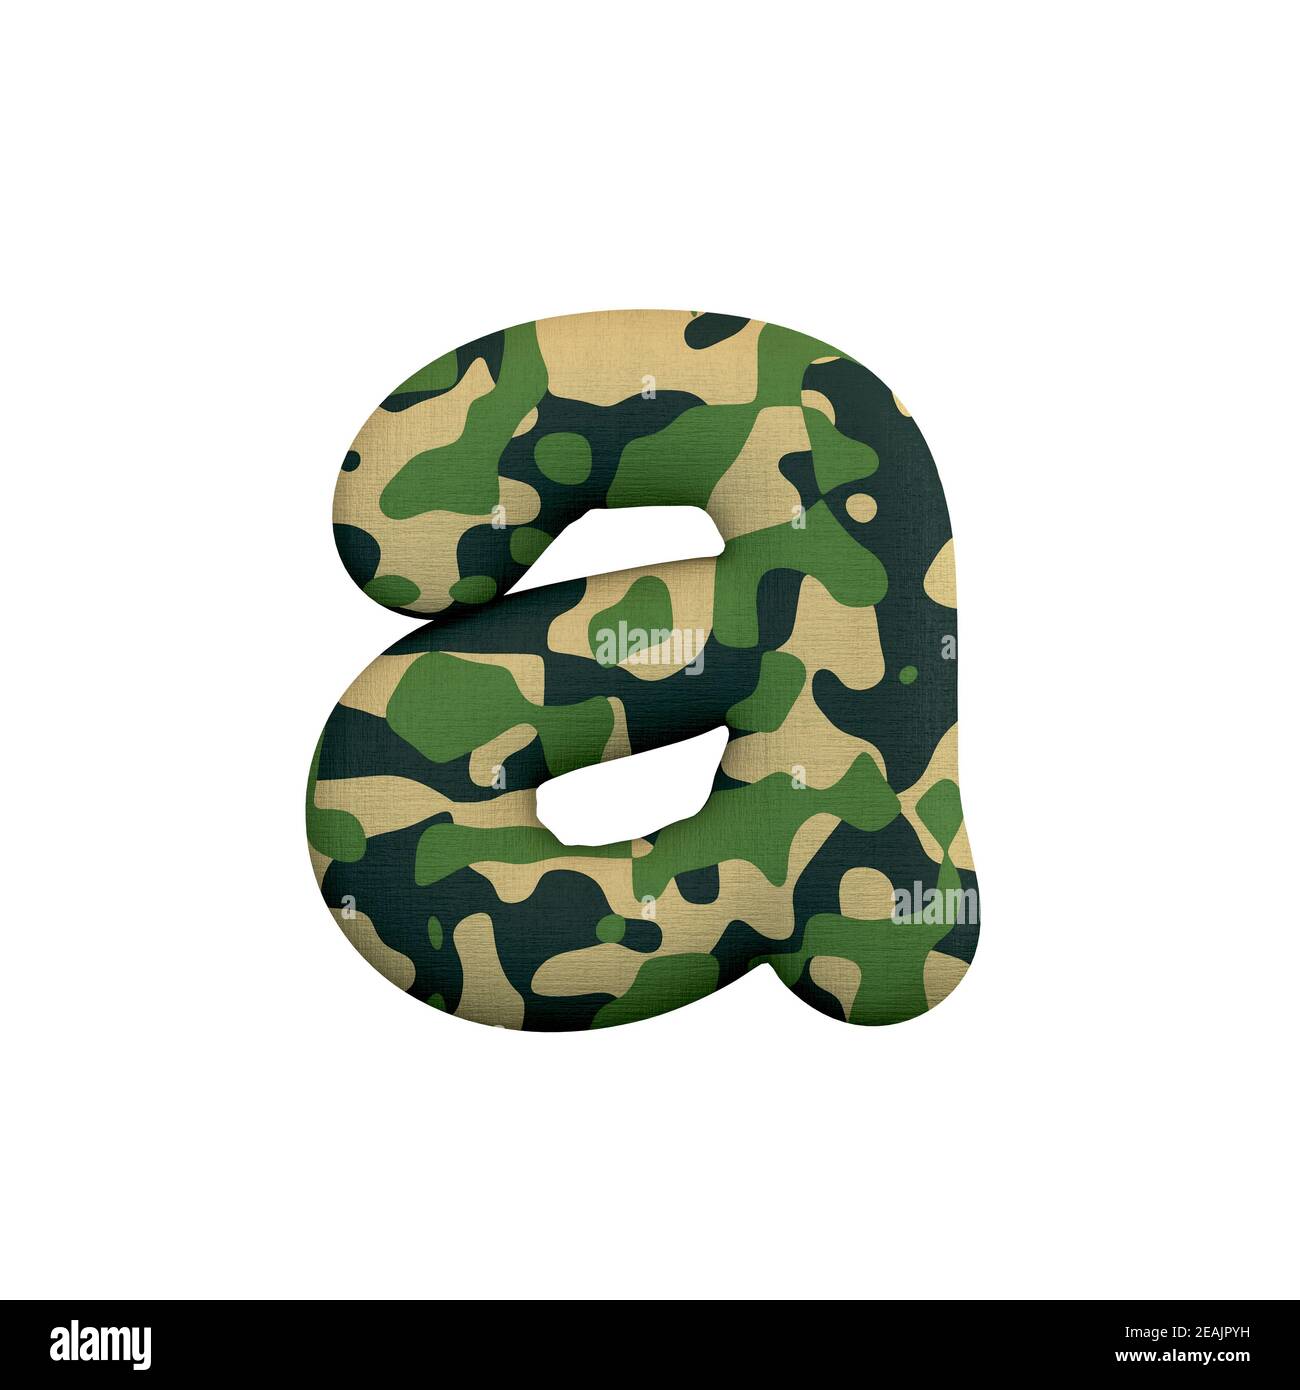 Army letter A - Lowercase 3d Camo font - Suitable for Army, war or survivalism related subjects Stock Photo